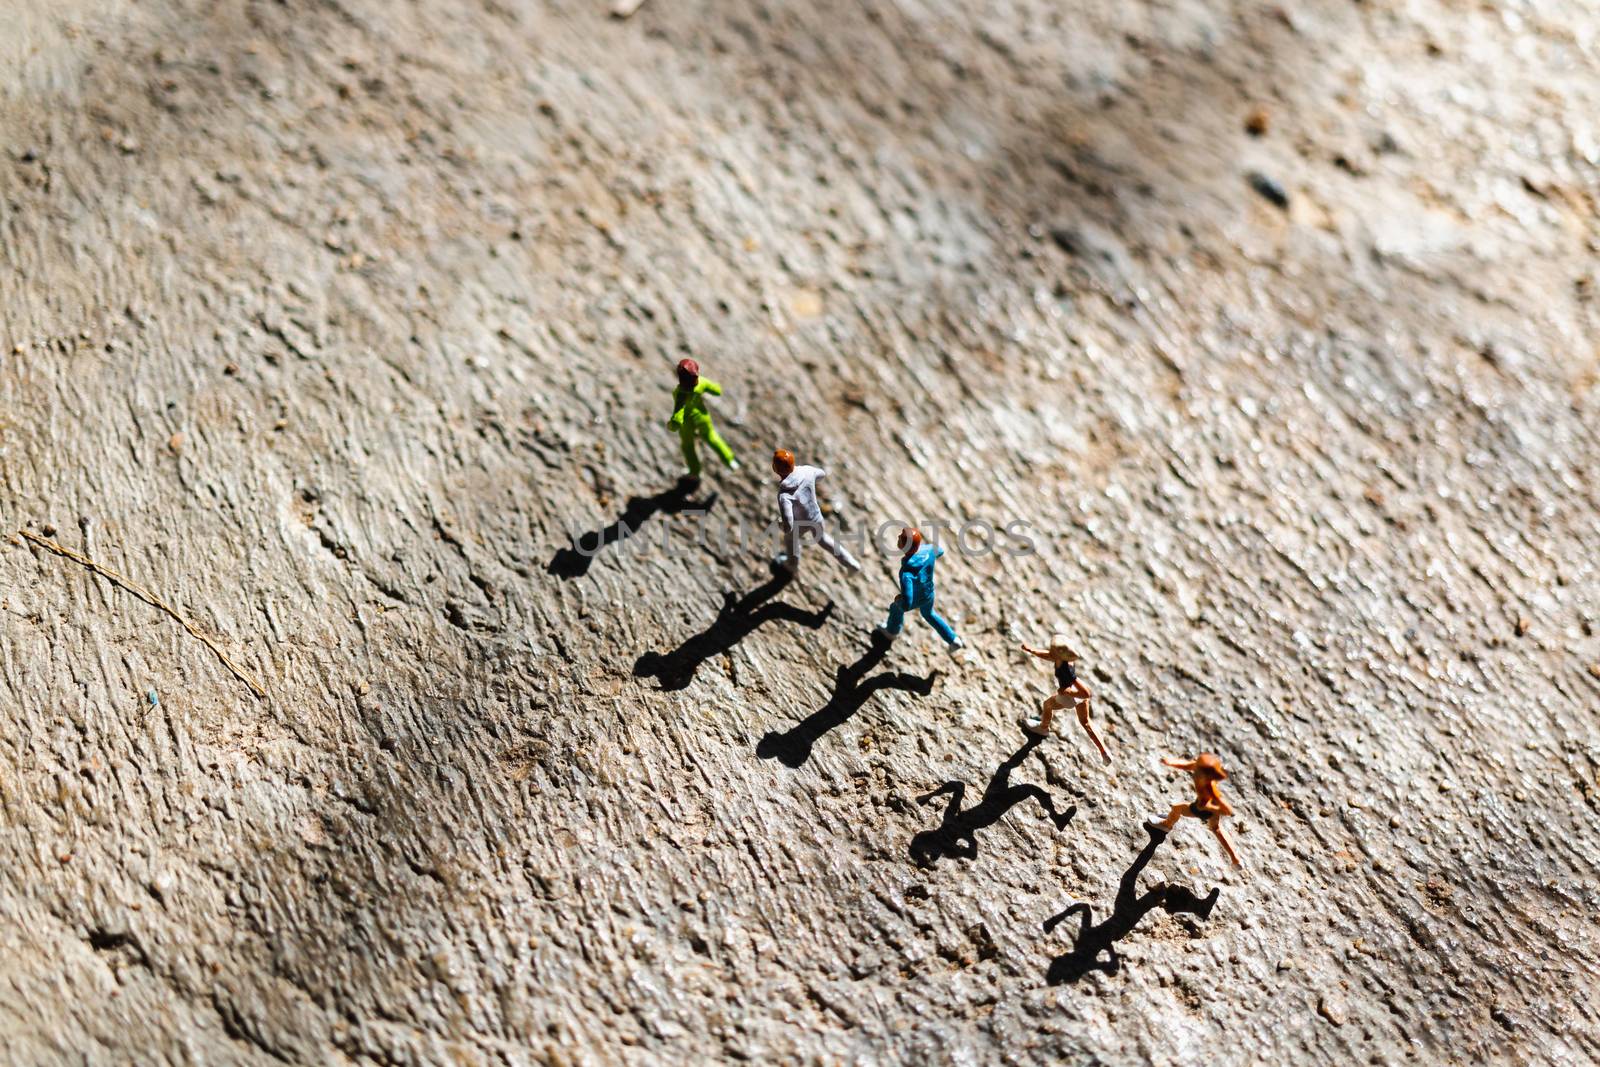 Miniature people : Group of people are running  on concrete floo by sirichaiyaymicro